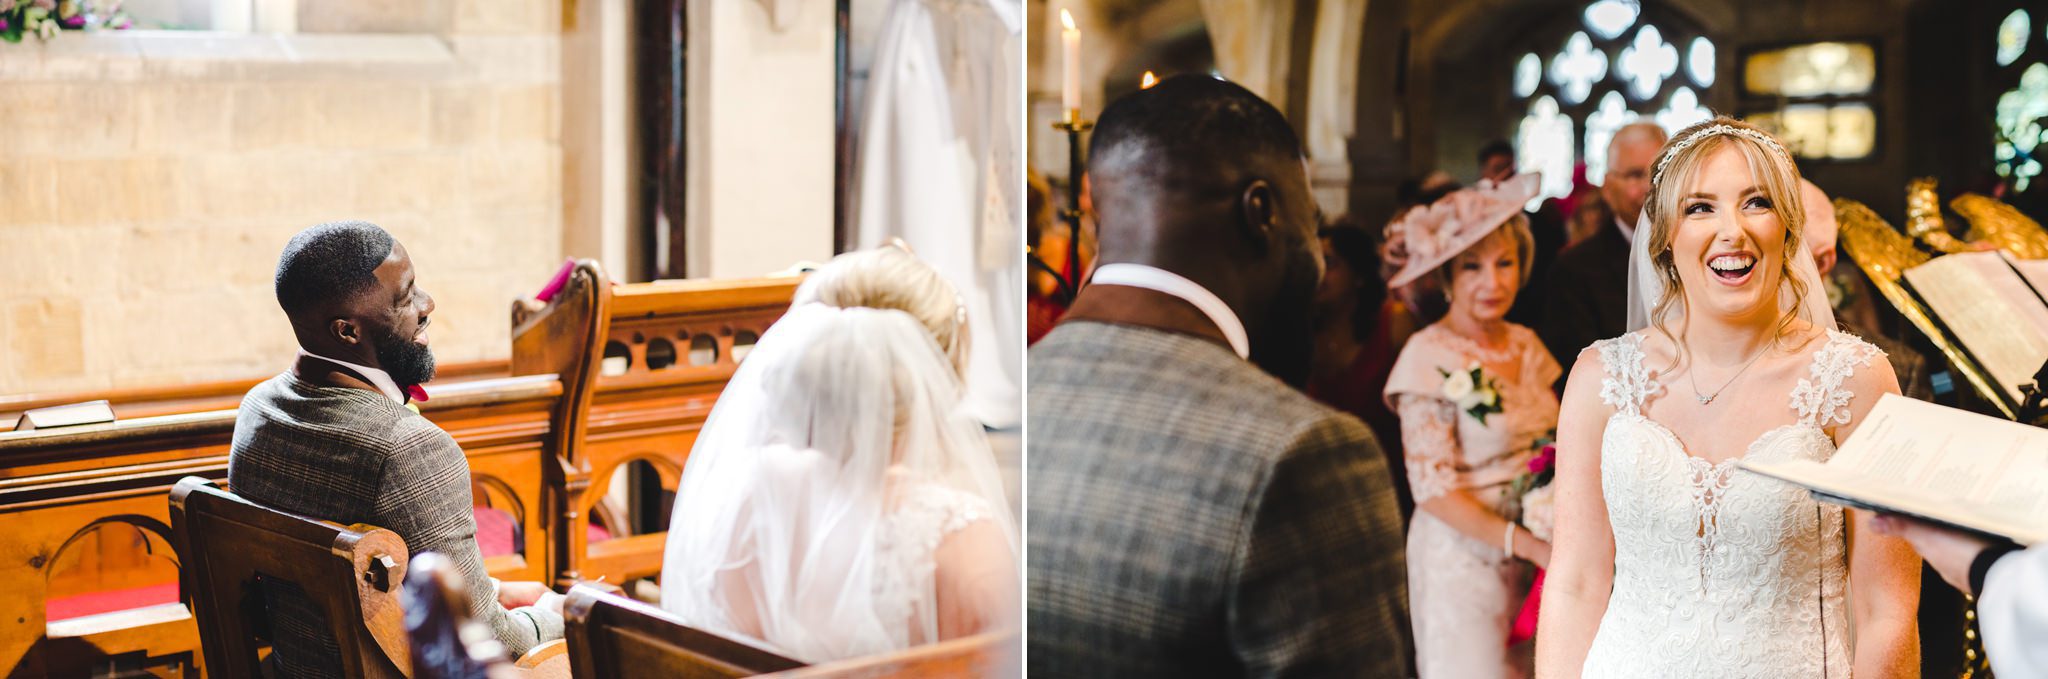 Candid wedding photography at Lower Slaughter Church